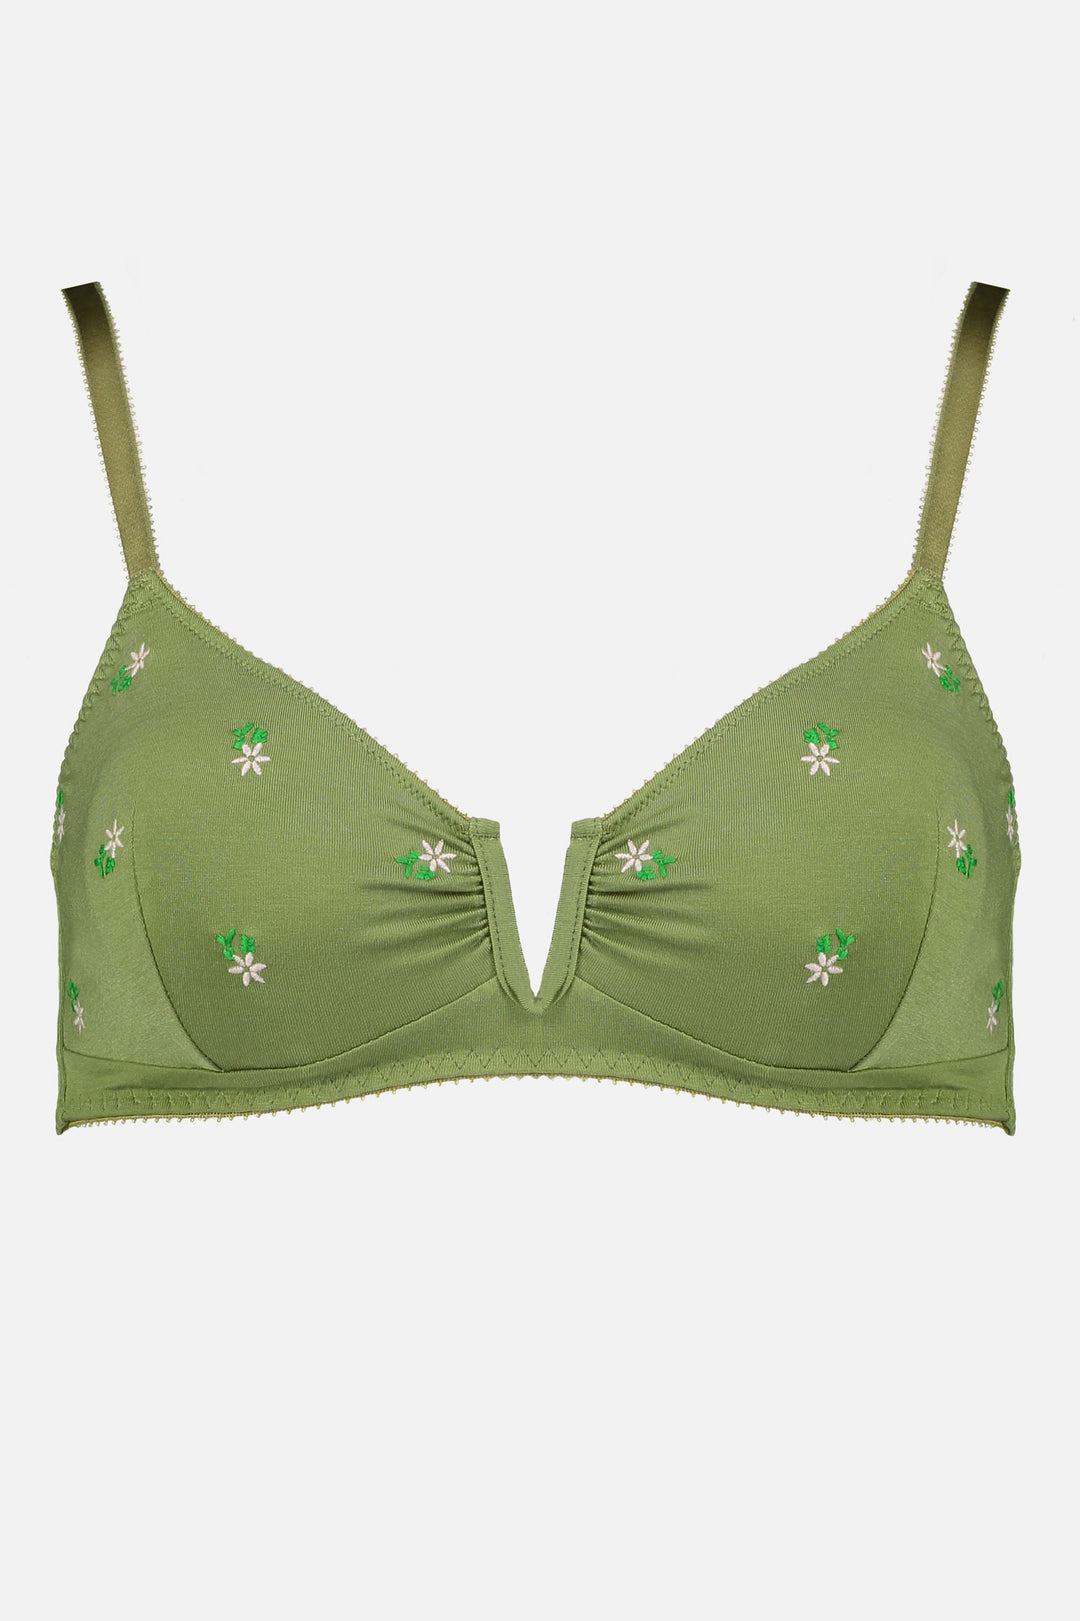 Videris Lingerie  Angela Soft Cup Bra in Olive Blossom Embroidery